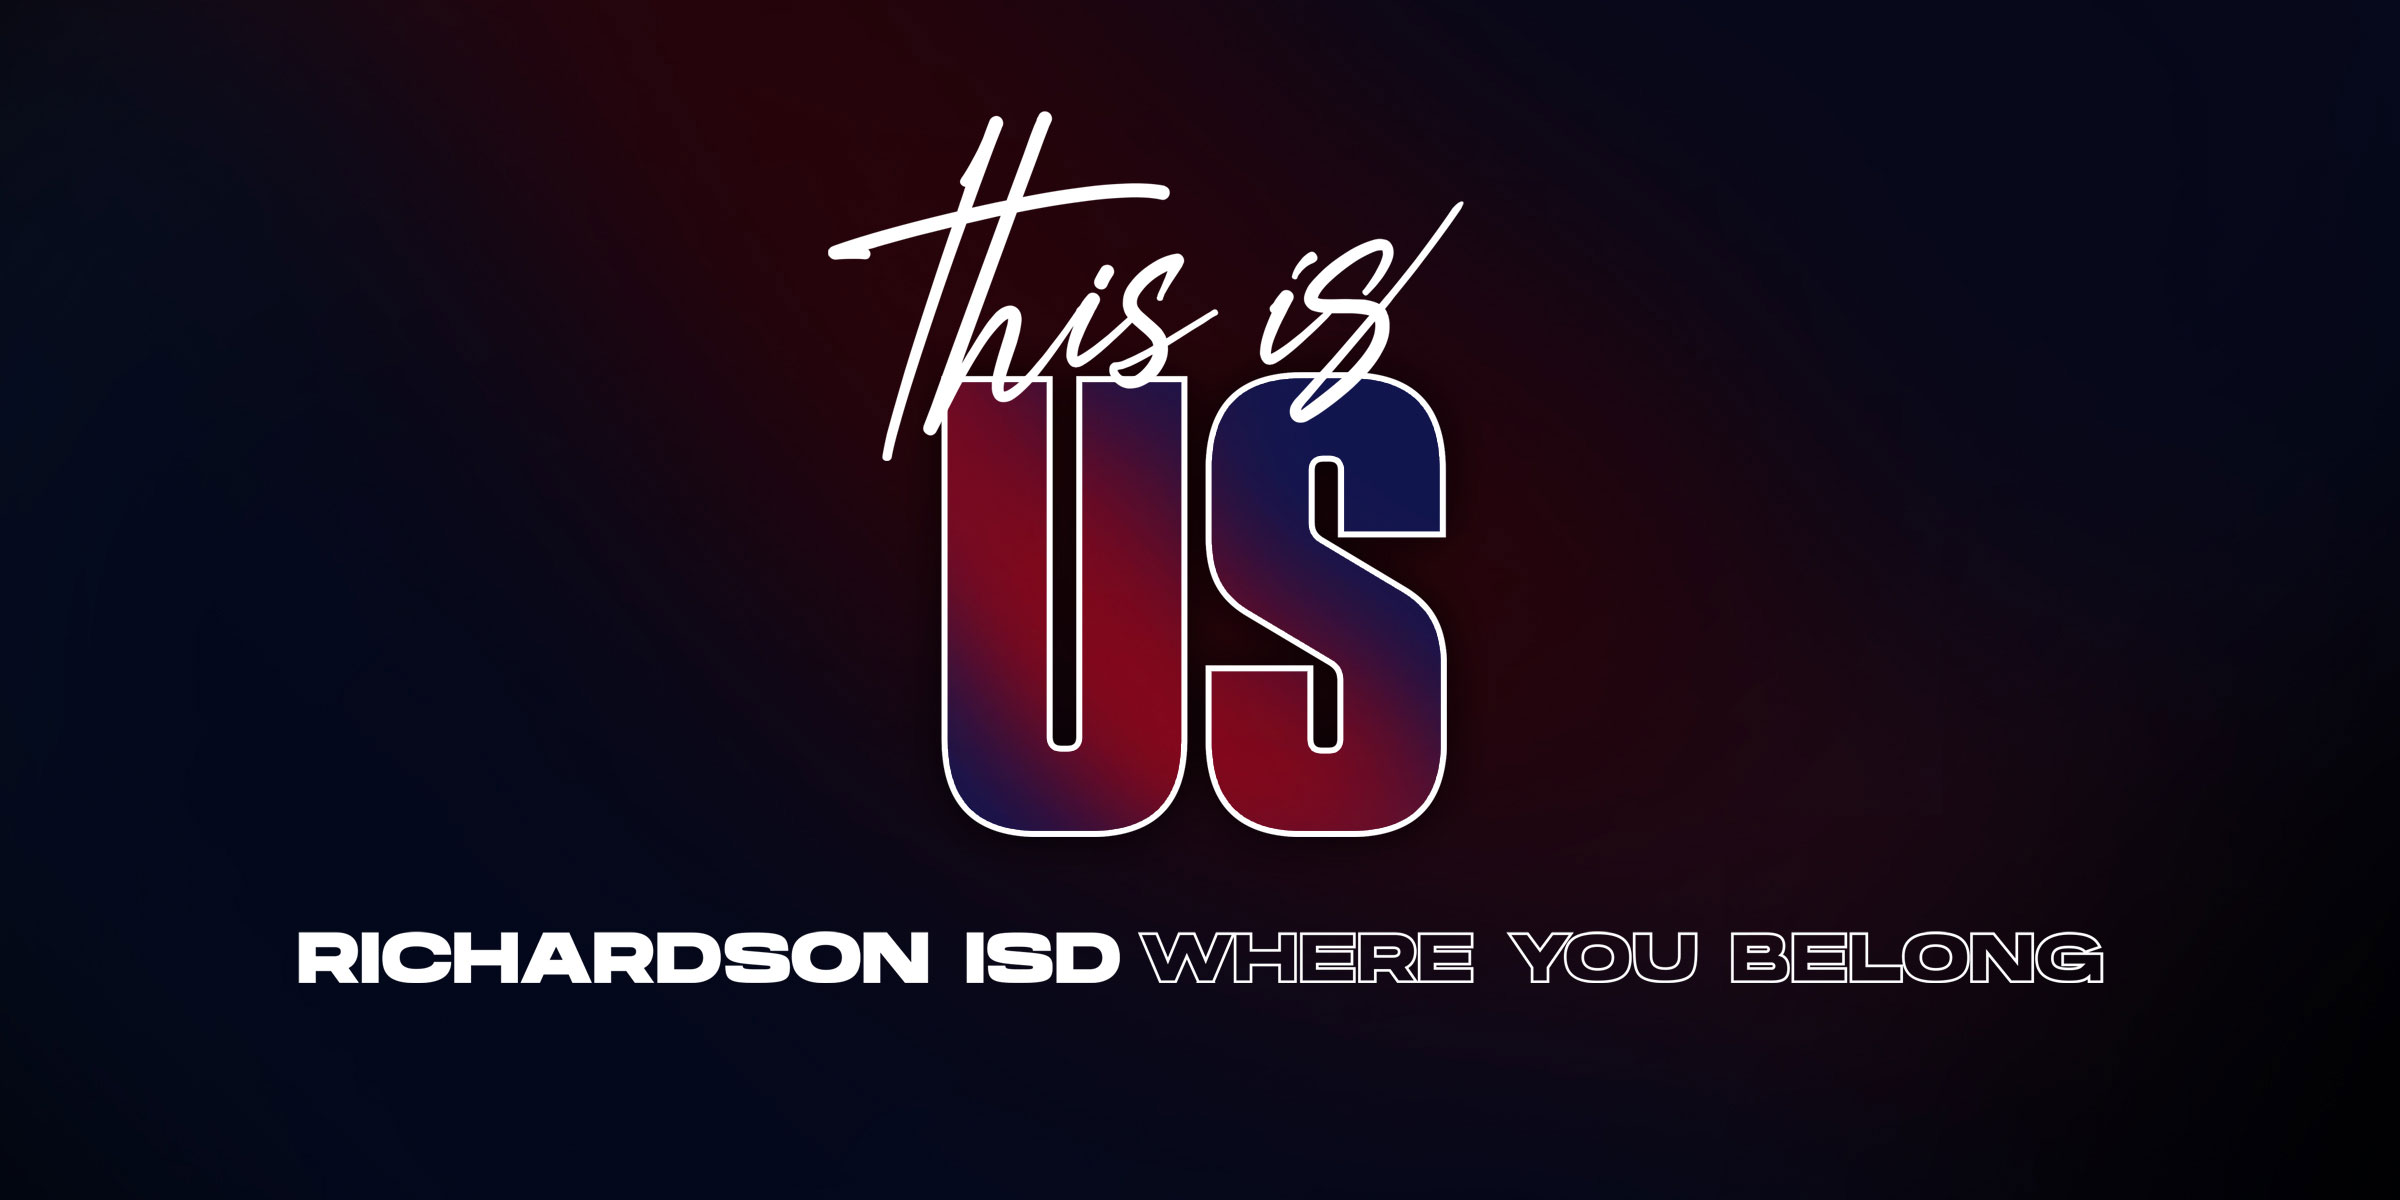 This is us, richardson isd where you belong